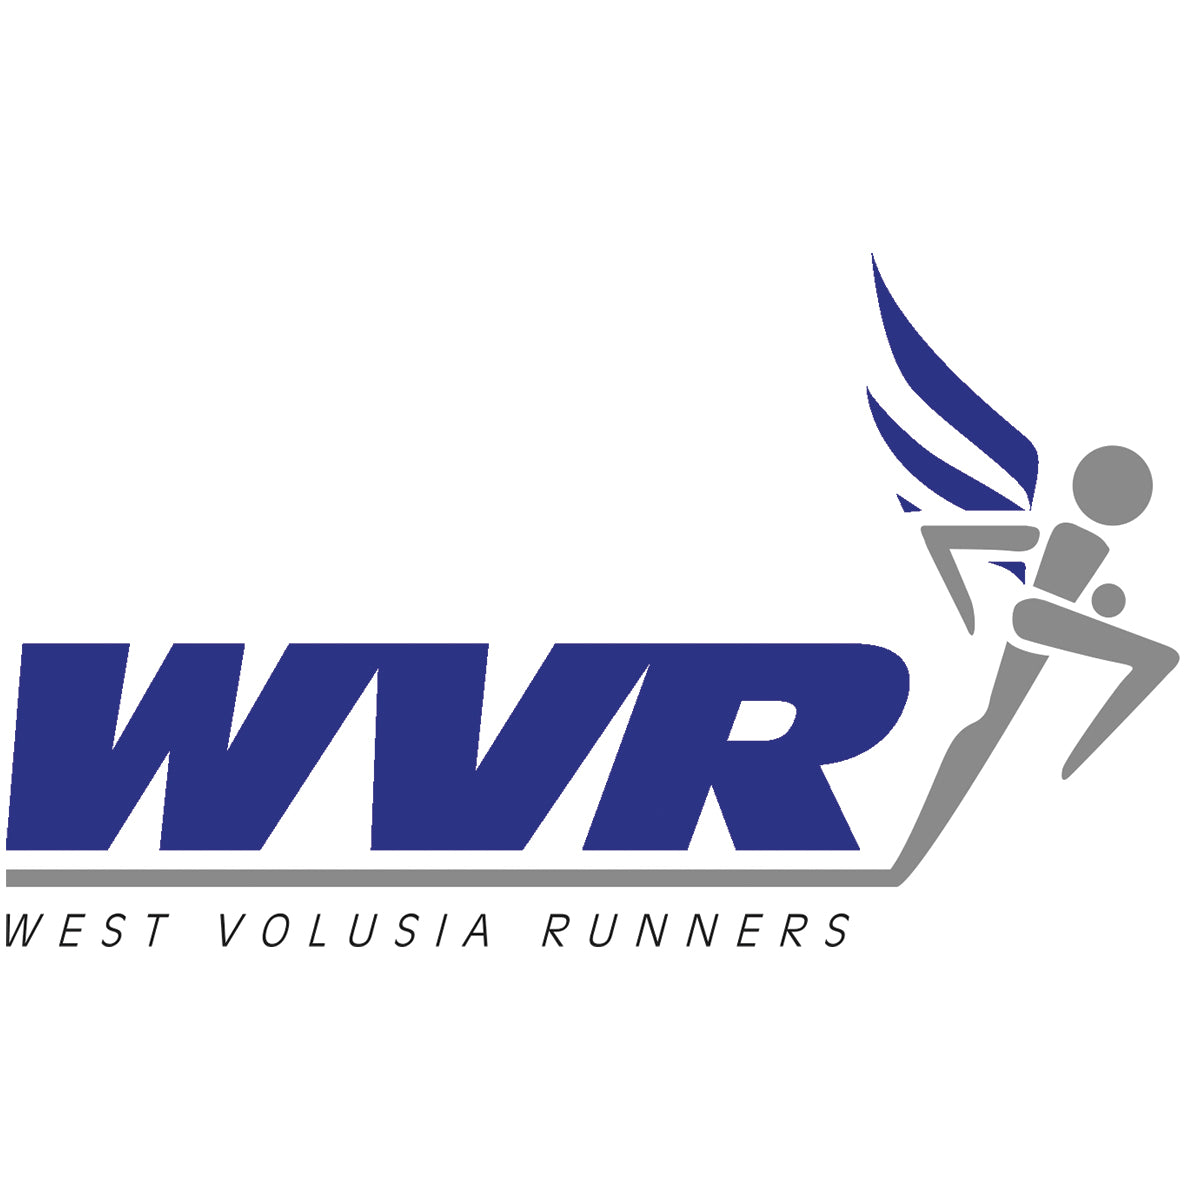 West Volusia Runners